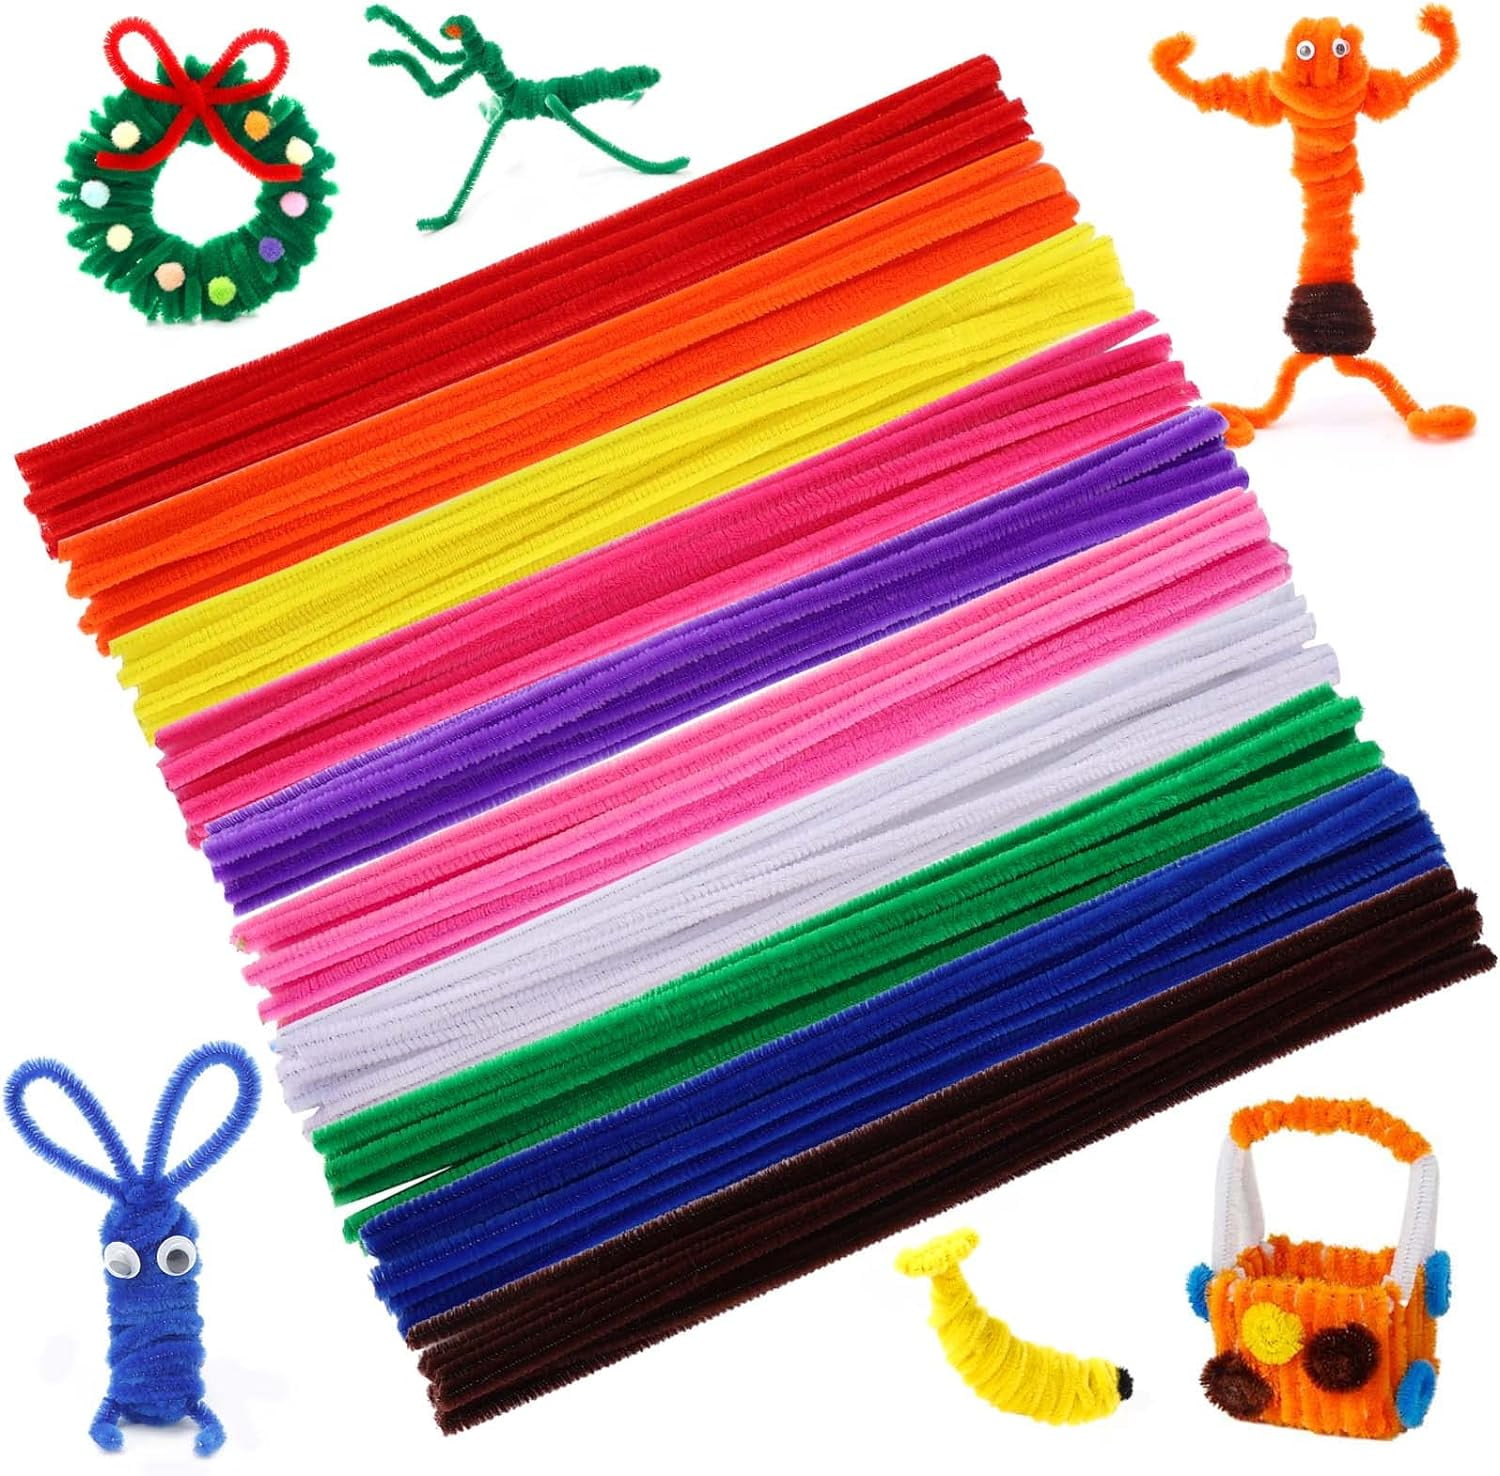 100 Pieces Pipe Cleaners 24 Assorted Colored Chenille Stems For